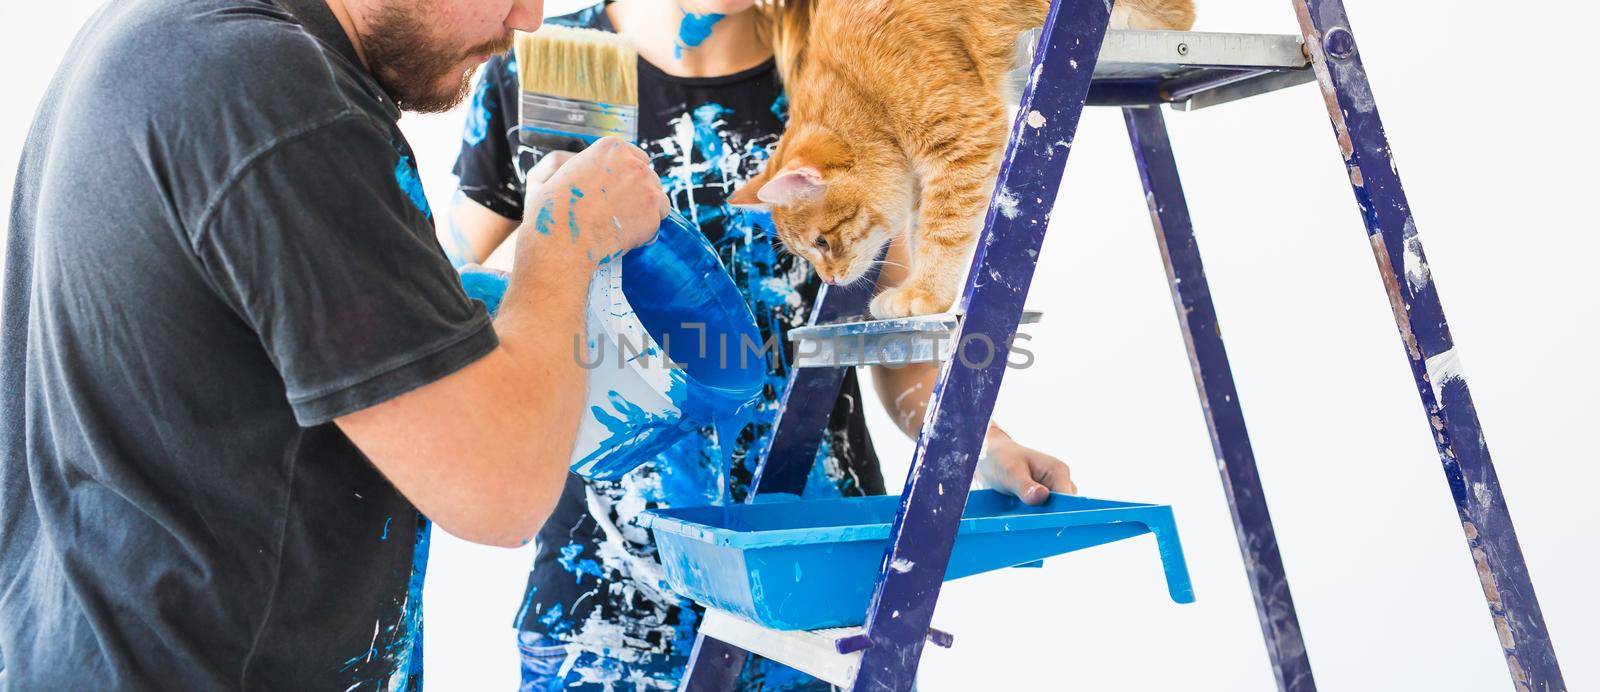 Repair, color, people concept - couple with cat going to paint the wall, they are preparing the color.